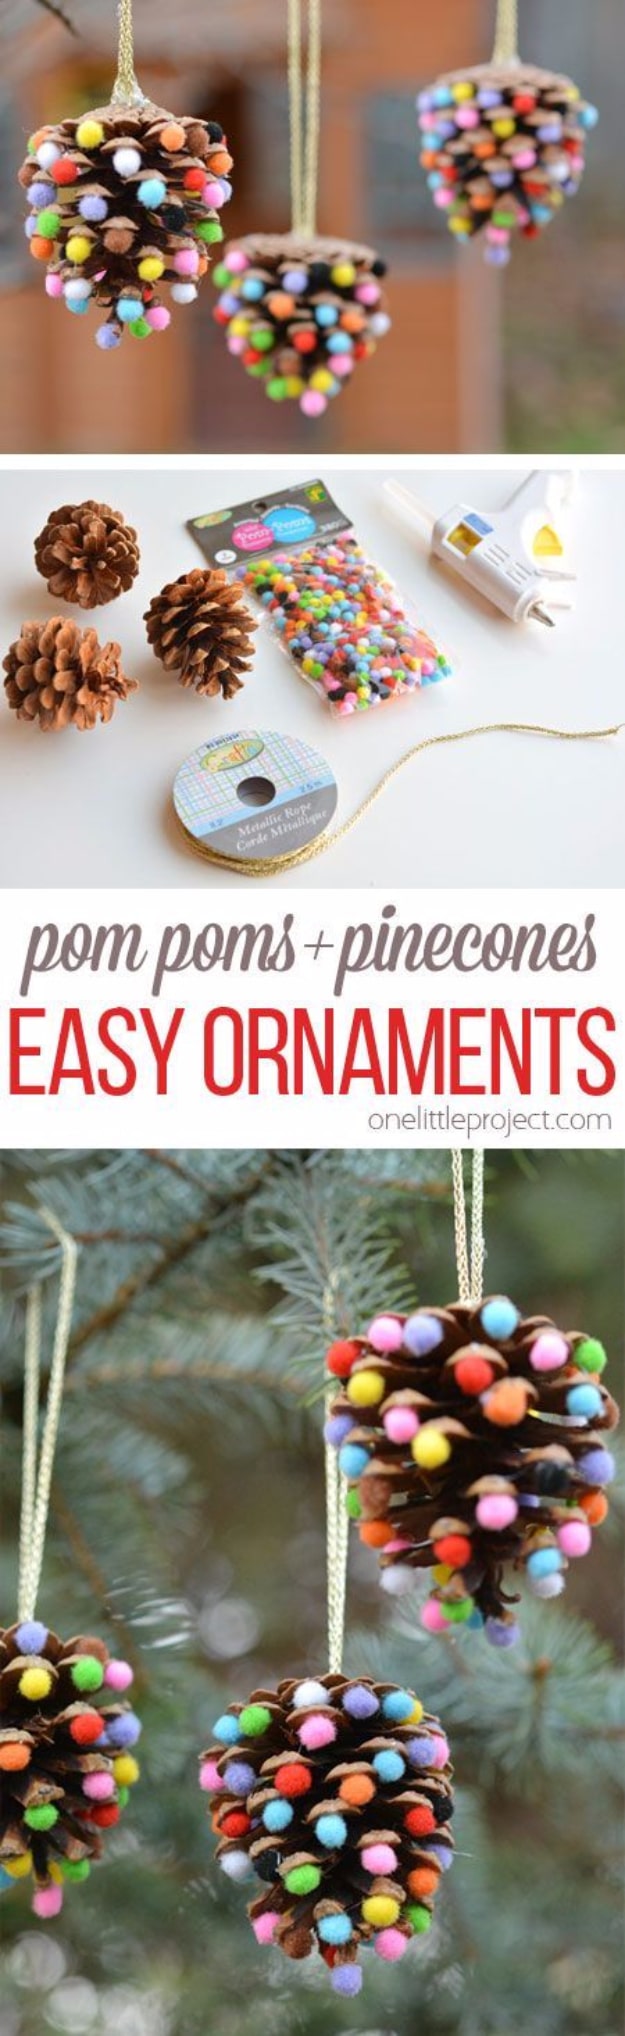 Best DIY Ornaments for Your Tree - Best DIY Ornament Ideas for Your Christmas Tree - Pom Poms And Pinecones Christmas Ornaments - Cool Handmade Ornaments, DIY Decorating Ideas and Ornament Tutorials - Creative Ways To Decorate Trees on A Budget - Cheap Rustic Decor, Easy Step by Step Tutorials - Holiday Crafts for Kids and Gifts To Make For Friends and Family 